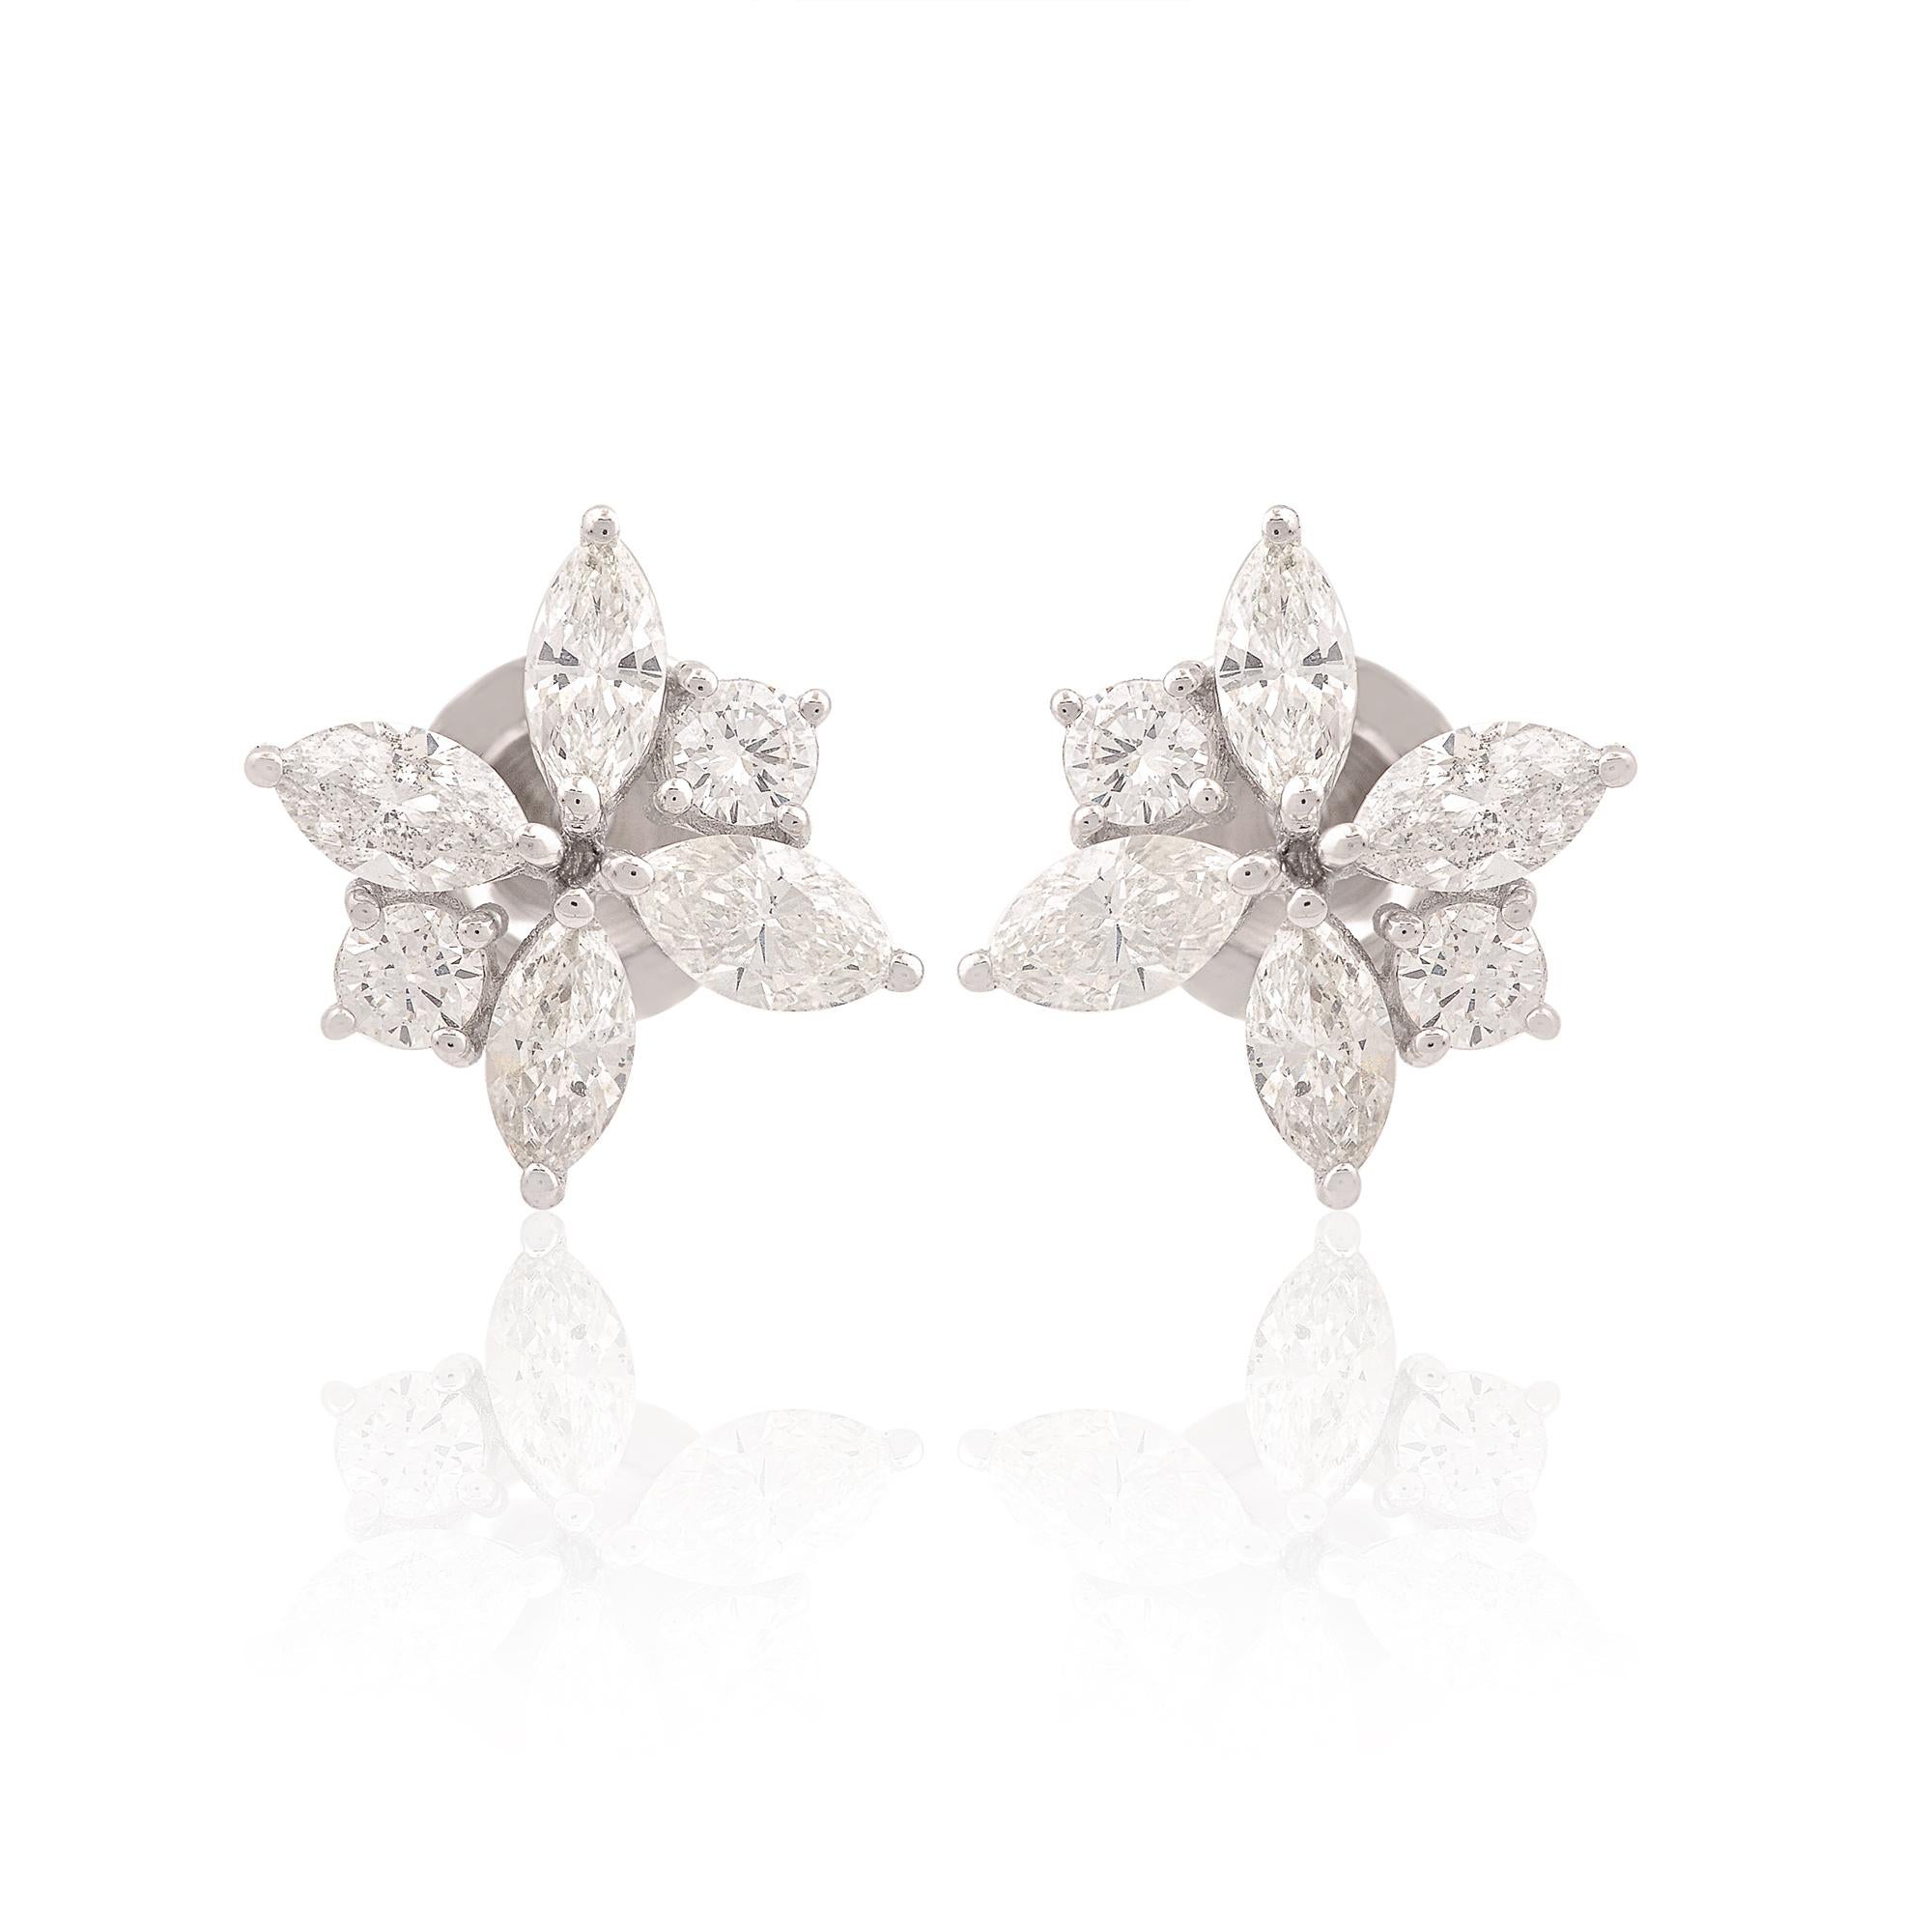 Indulge in the timeless elegance of these exquisite diamond stud earrings, each boasting a combination of marquise and round-cut diamonds set in luxurious 14 karat white gold. Crafted with meticulous attention to detail, these earrings exude